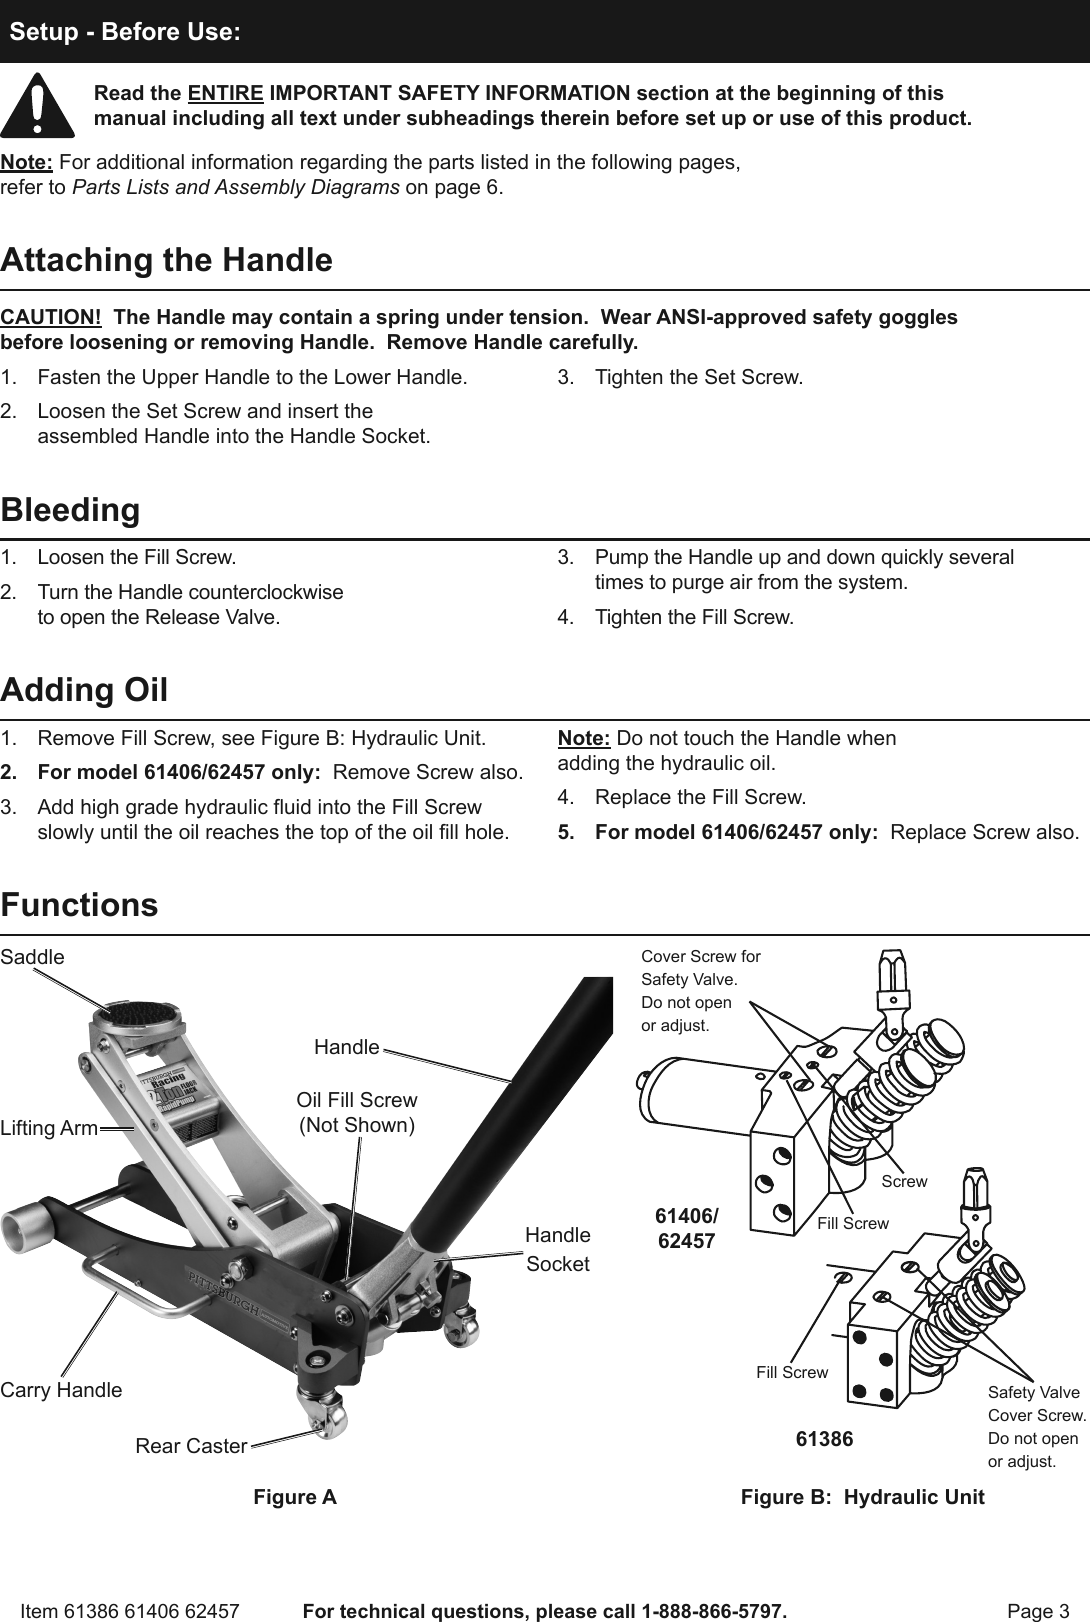 Page 3 of 8 - Harbor-Freight Harbor-Freight-2-Ton-Aluminum-Racing-Floor-Jack-With-Rapidpump-Product-Manual-  Harbor-freight-2-ton-aluminum-racing-floor-jack-with-rapidpump-product-manual